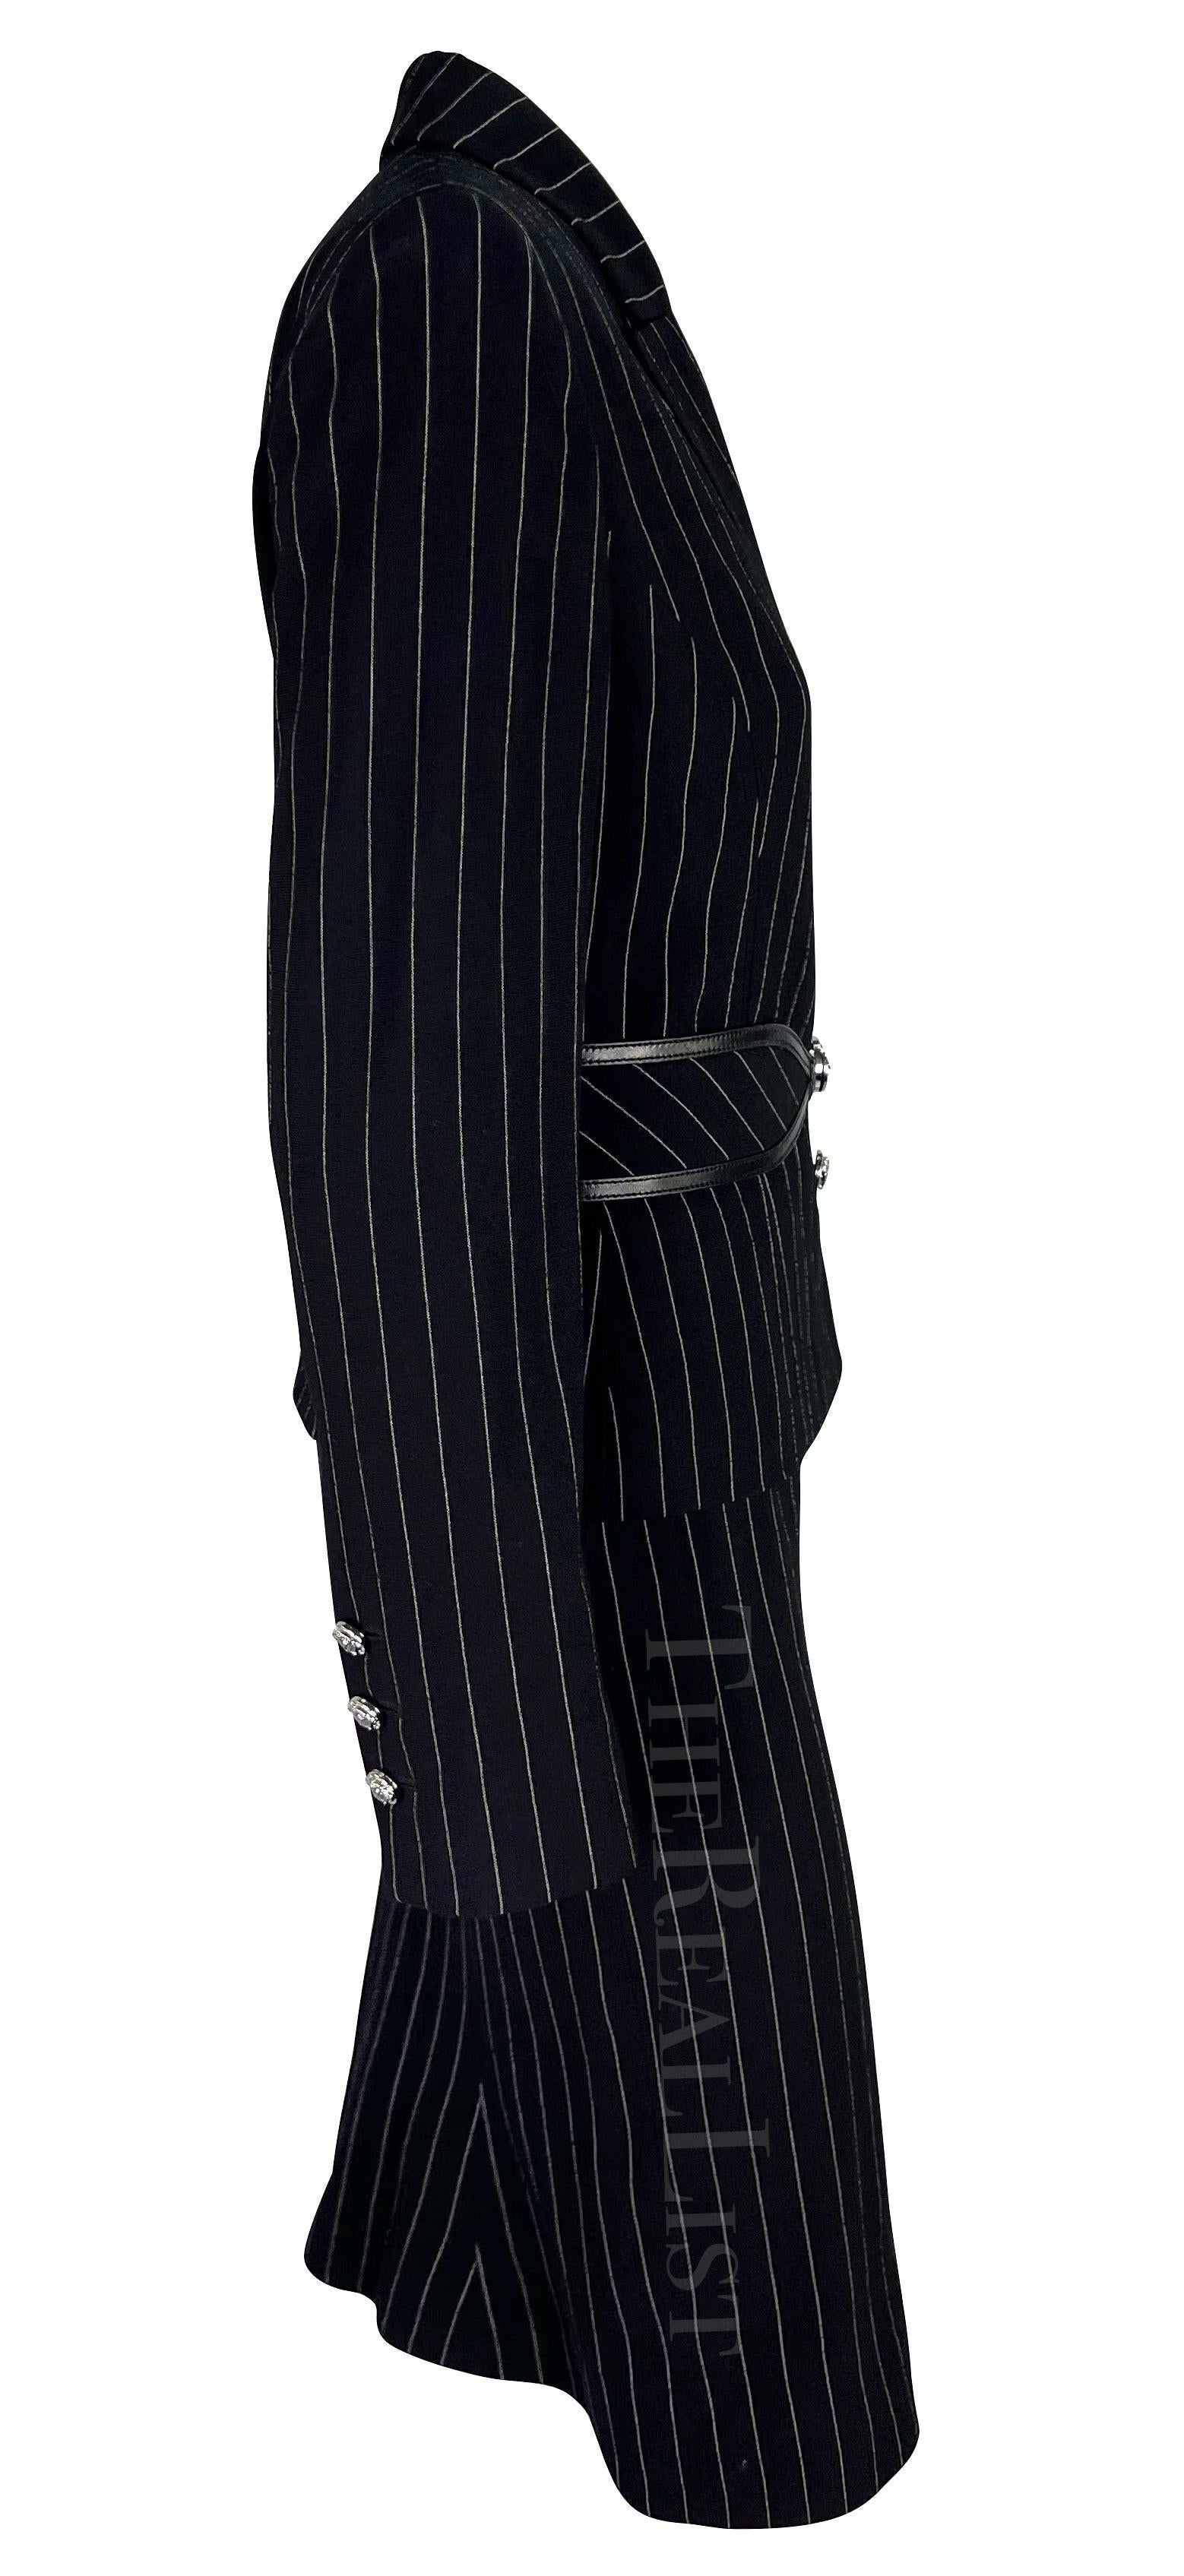 NWT F/W 2004 Versace by Donatella Black Wool Blend Pinstripe Medusa Belted Suit For Sale 3